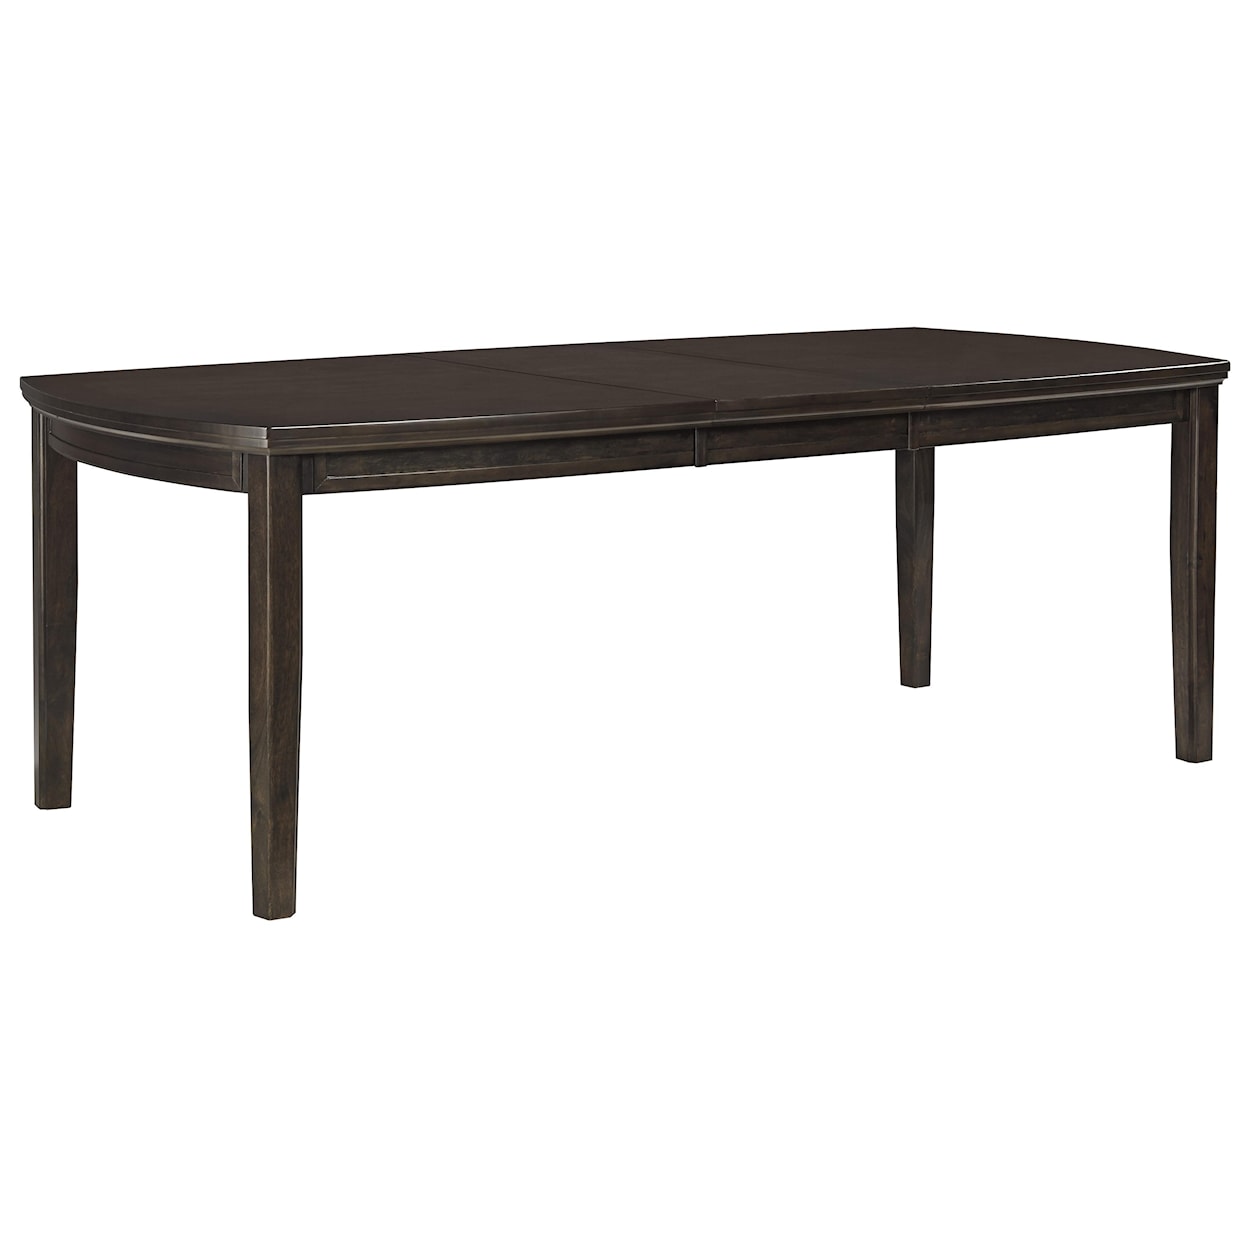 Signature Design by Ashley Lanquist Rectangular Dining Room Extension Table